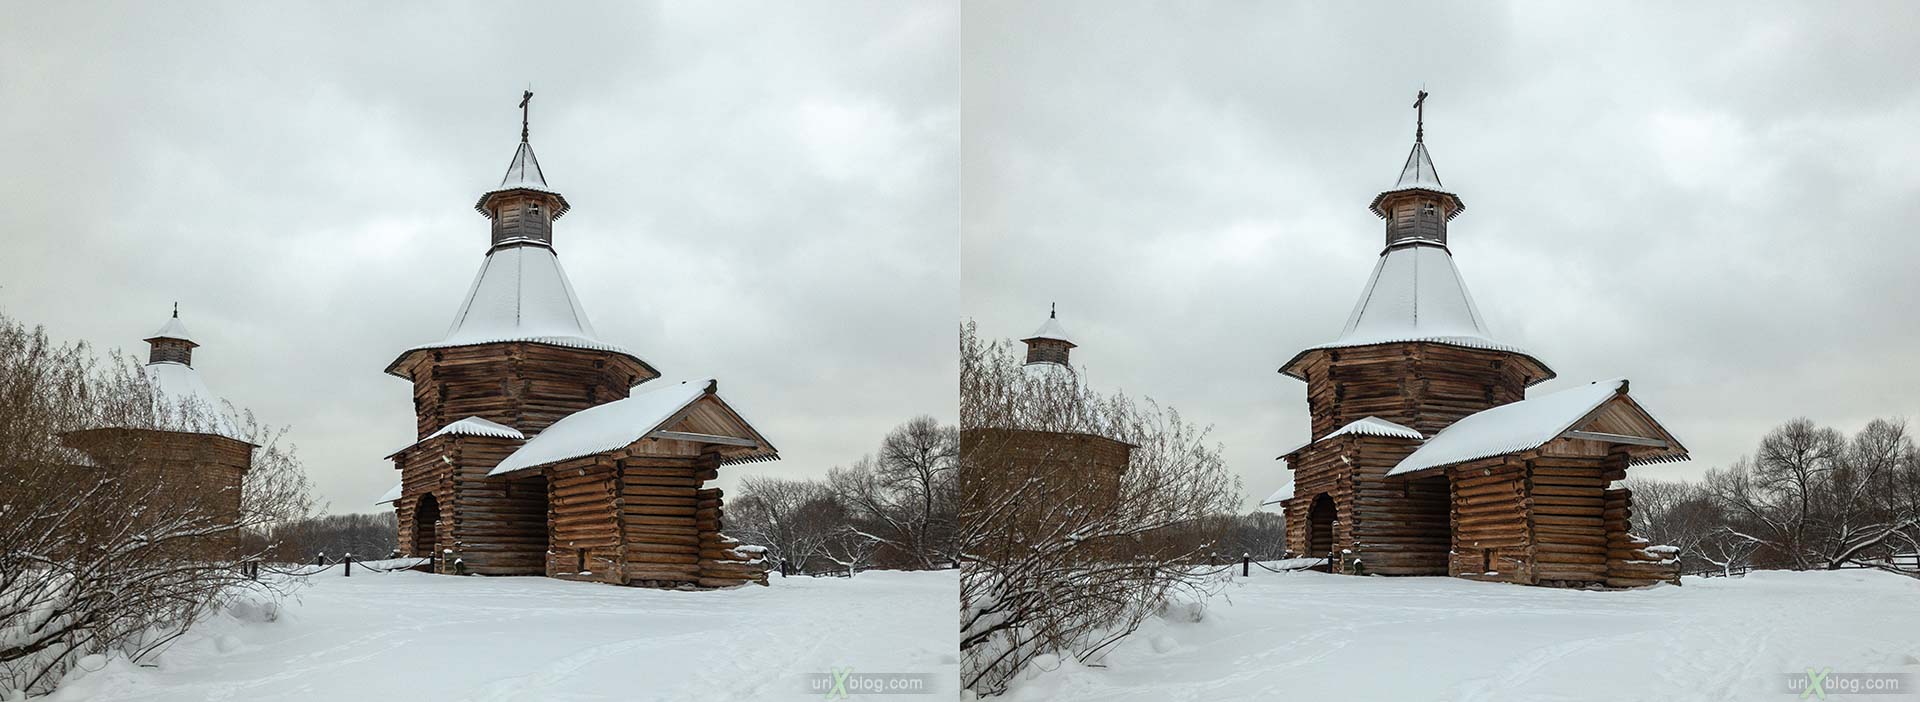 Russian Wooden Architecture, tower of the Nikolo-Korelsky monastery, Mokhovaya (Moss) tower, Kolomenskoye, park, wooden building, winter, snow, Moscow, Russia, 3D, stereo pair, cross-eyed, crossview, cross view stereo pair, stereoscopic